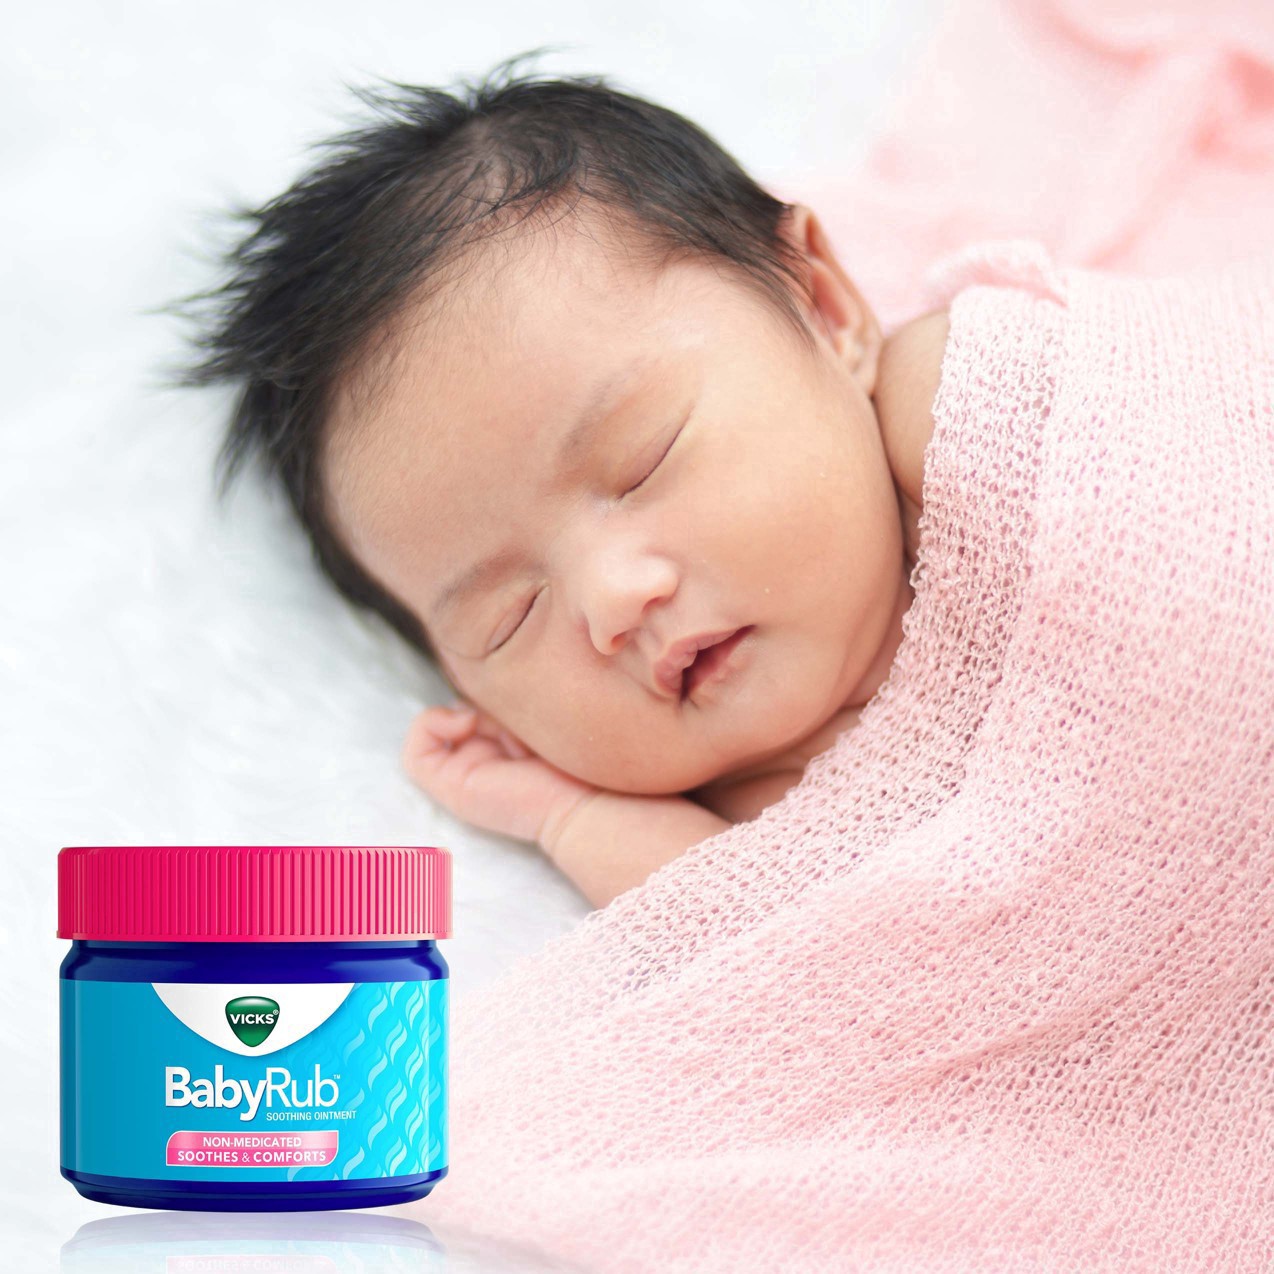 slide 74 of 78, Vicks BabyRub, Chest Rub Ointment with Soothing Aloe, Eucalyptus, Lavender, and Rosemary, from The Makers of VapoRub, 1.76 oz, 1.76 oz